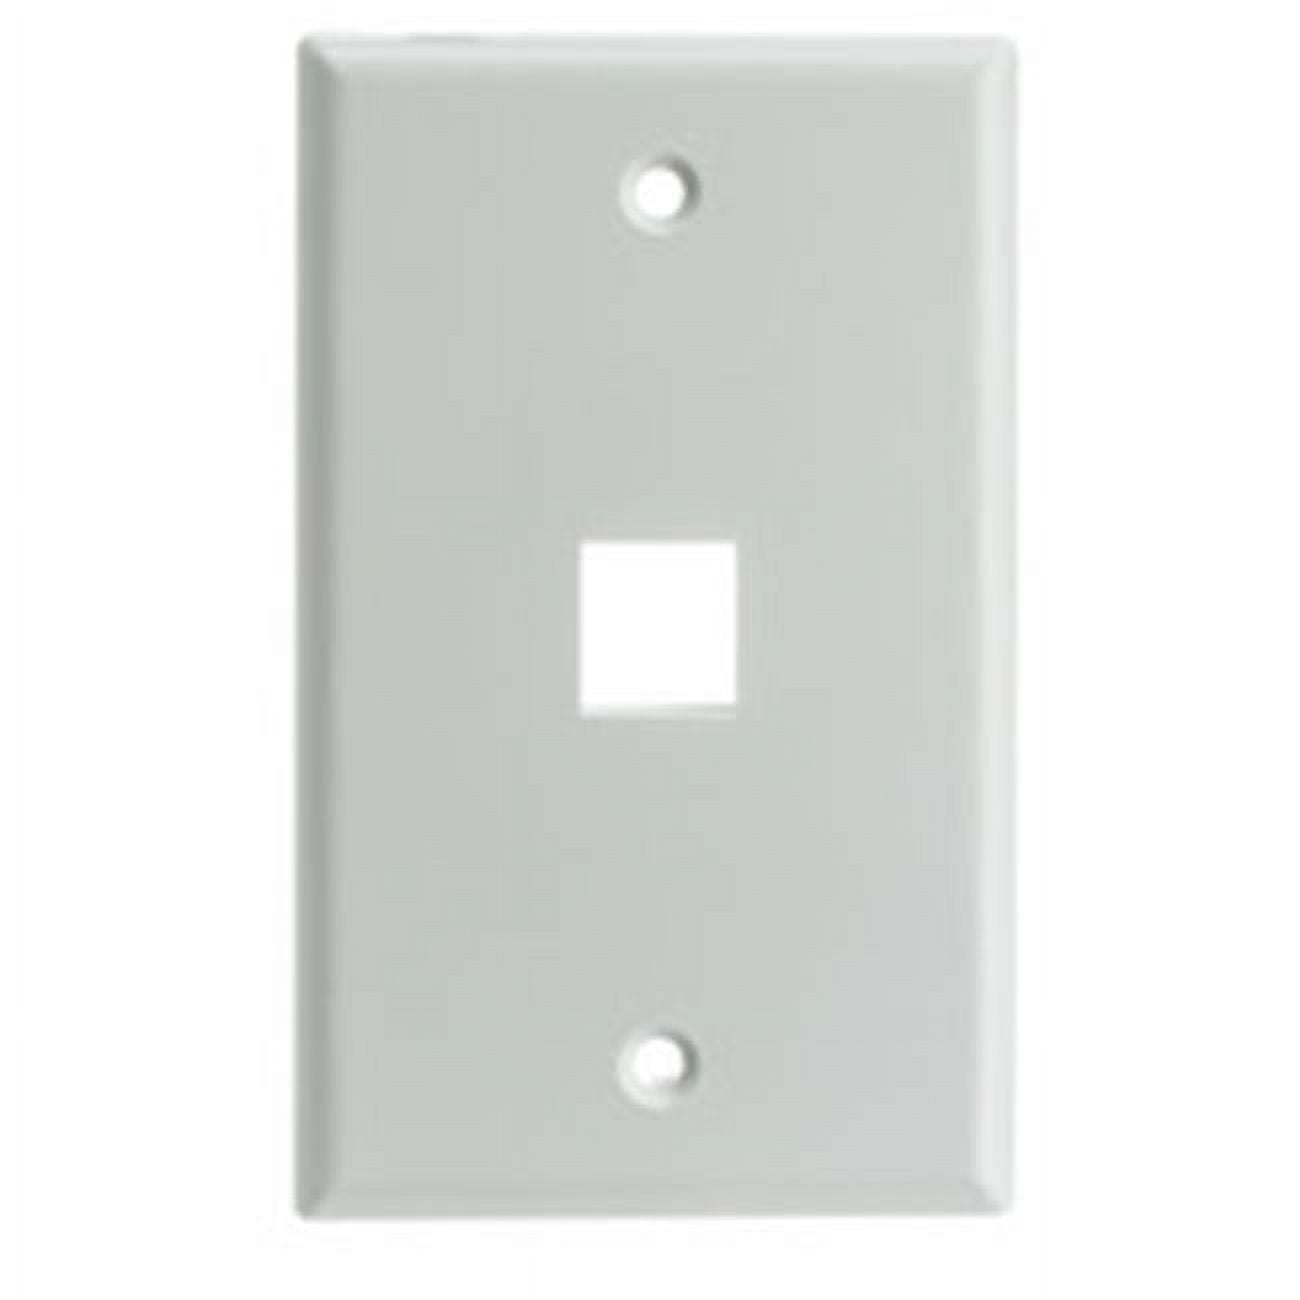 Picture of Cable Wholesale 301-6K-W 6 Port Keystone Wall Plate, Single Gang - White